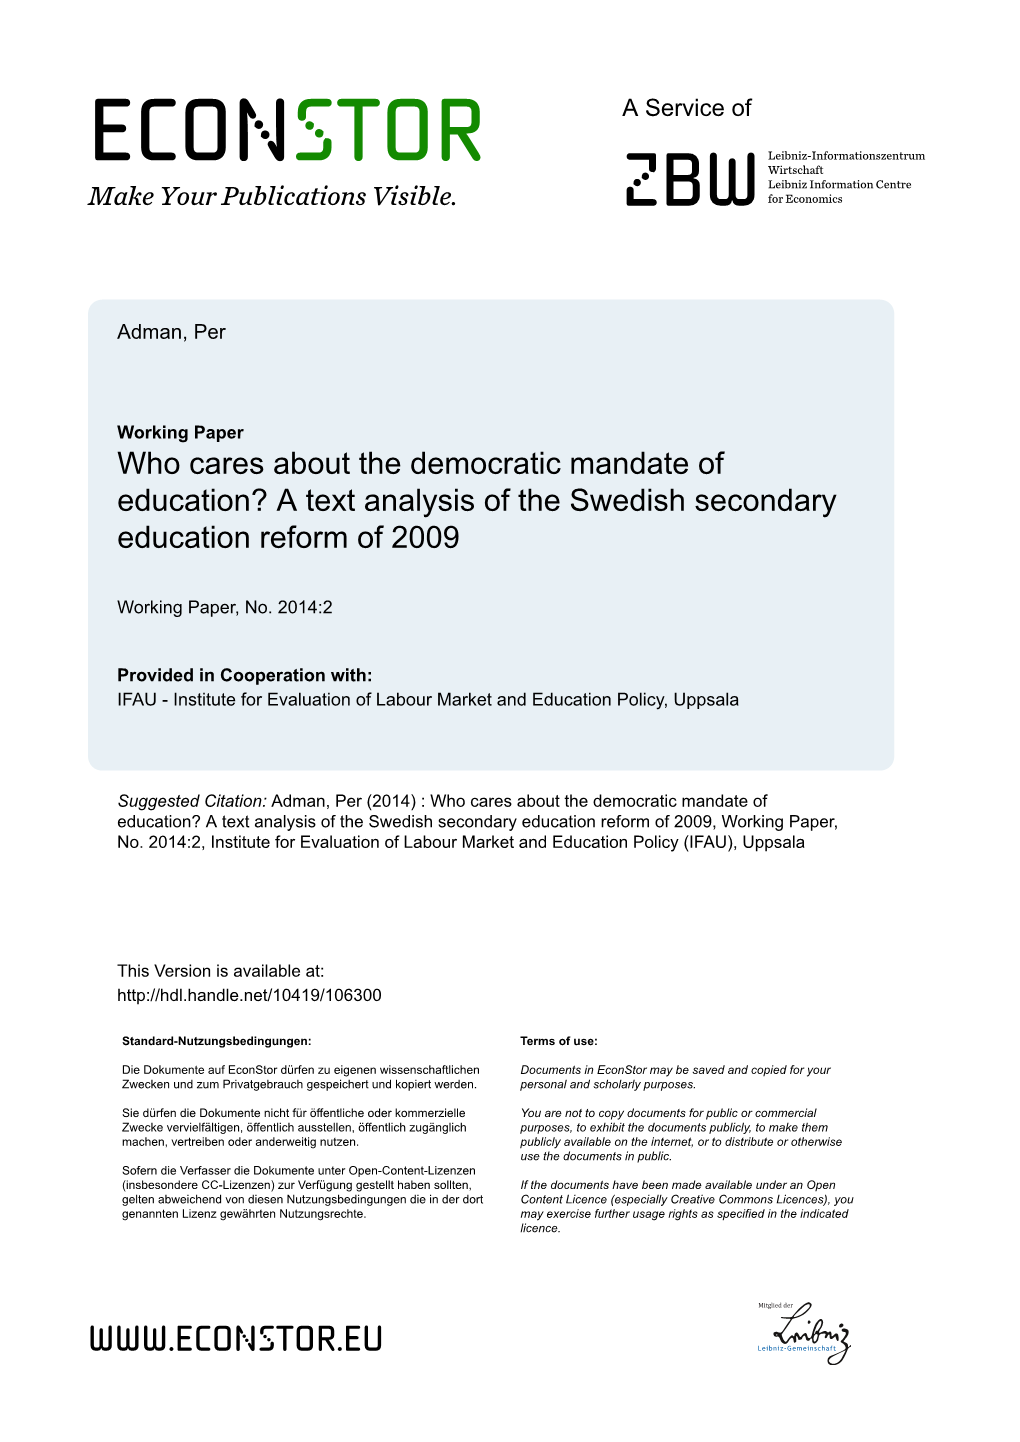 Who Cares About the Democratic Mandate of Education? a Text Analysis of the Swedish Secondary Education Reform of 2009